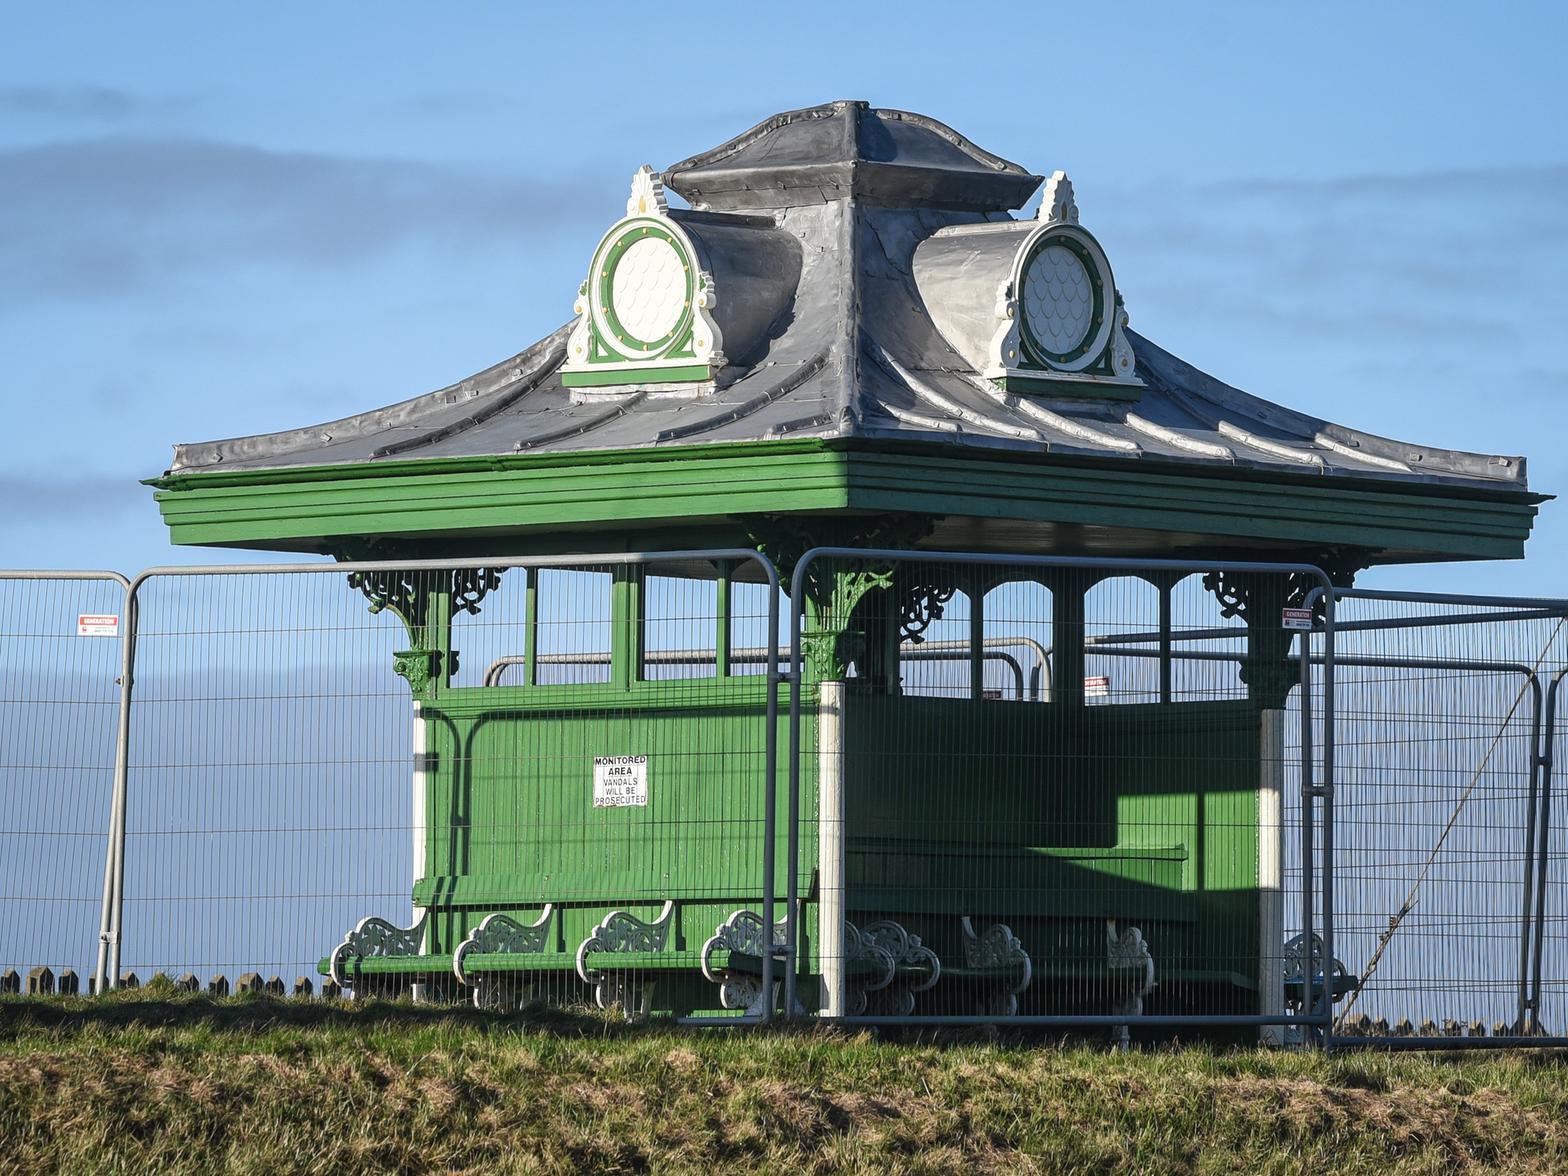 Queen's Promenade Shelter, probably l905. Cast iron with wooden side screens and partition, lead-covered roof.